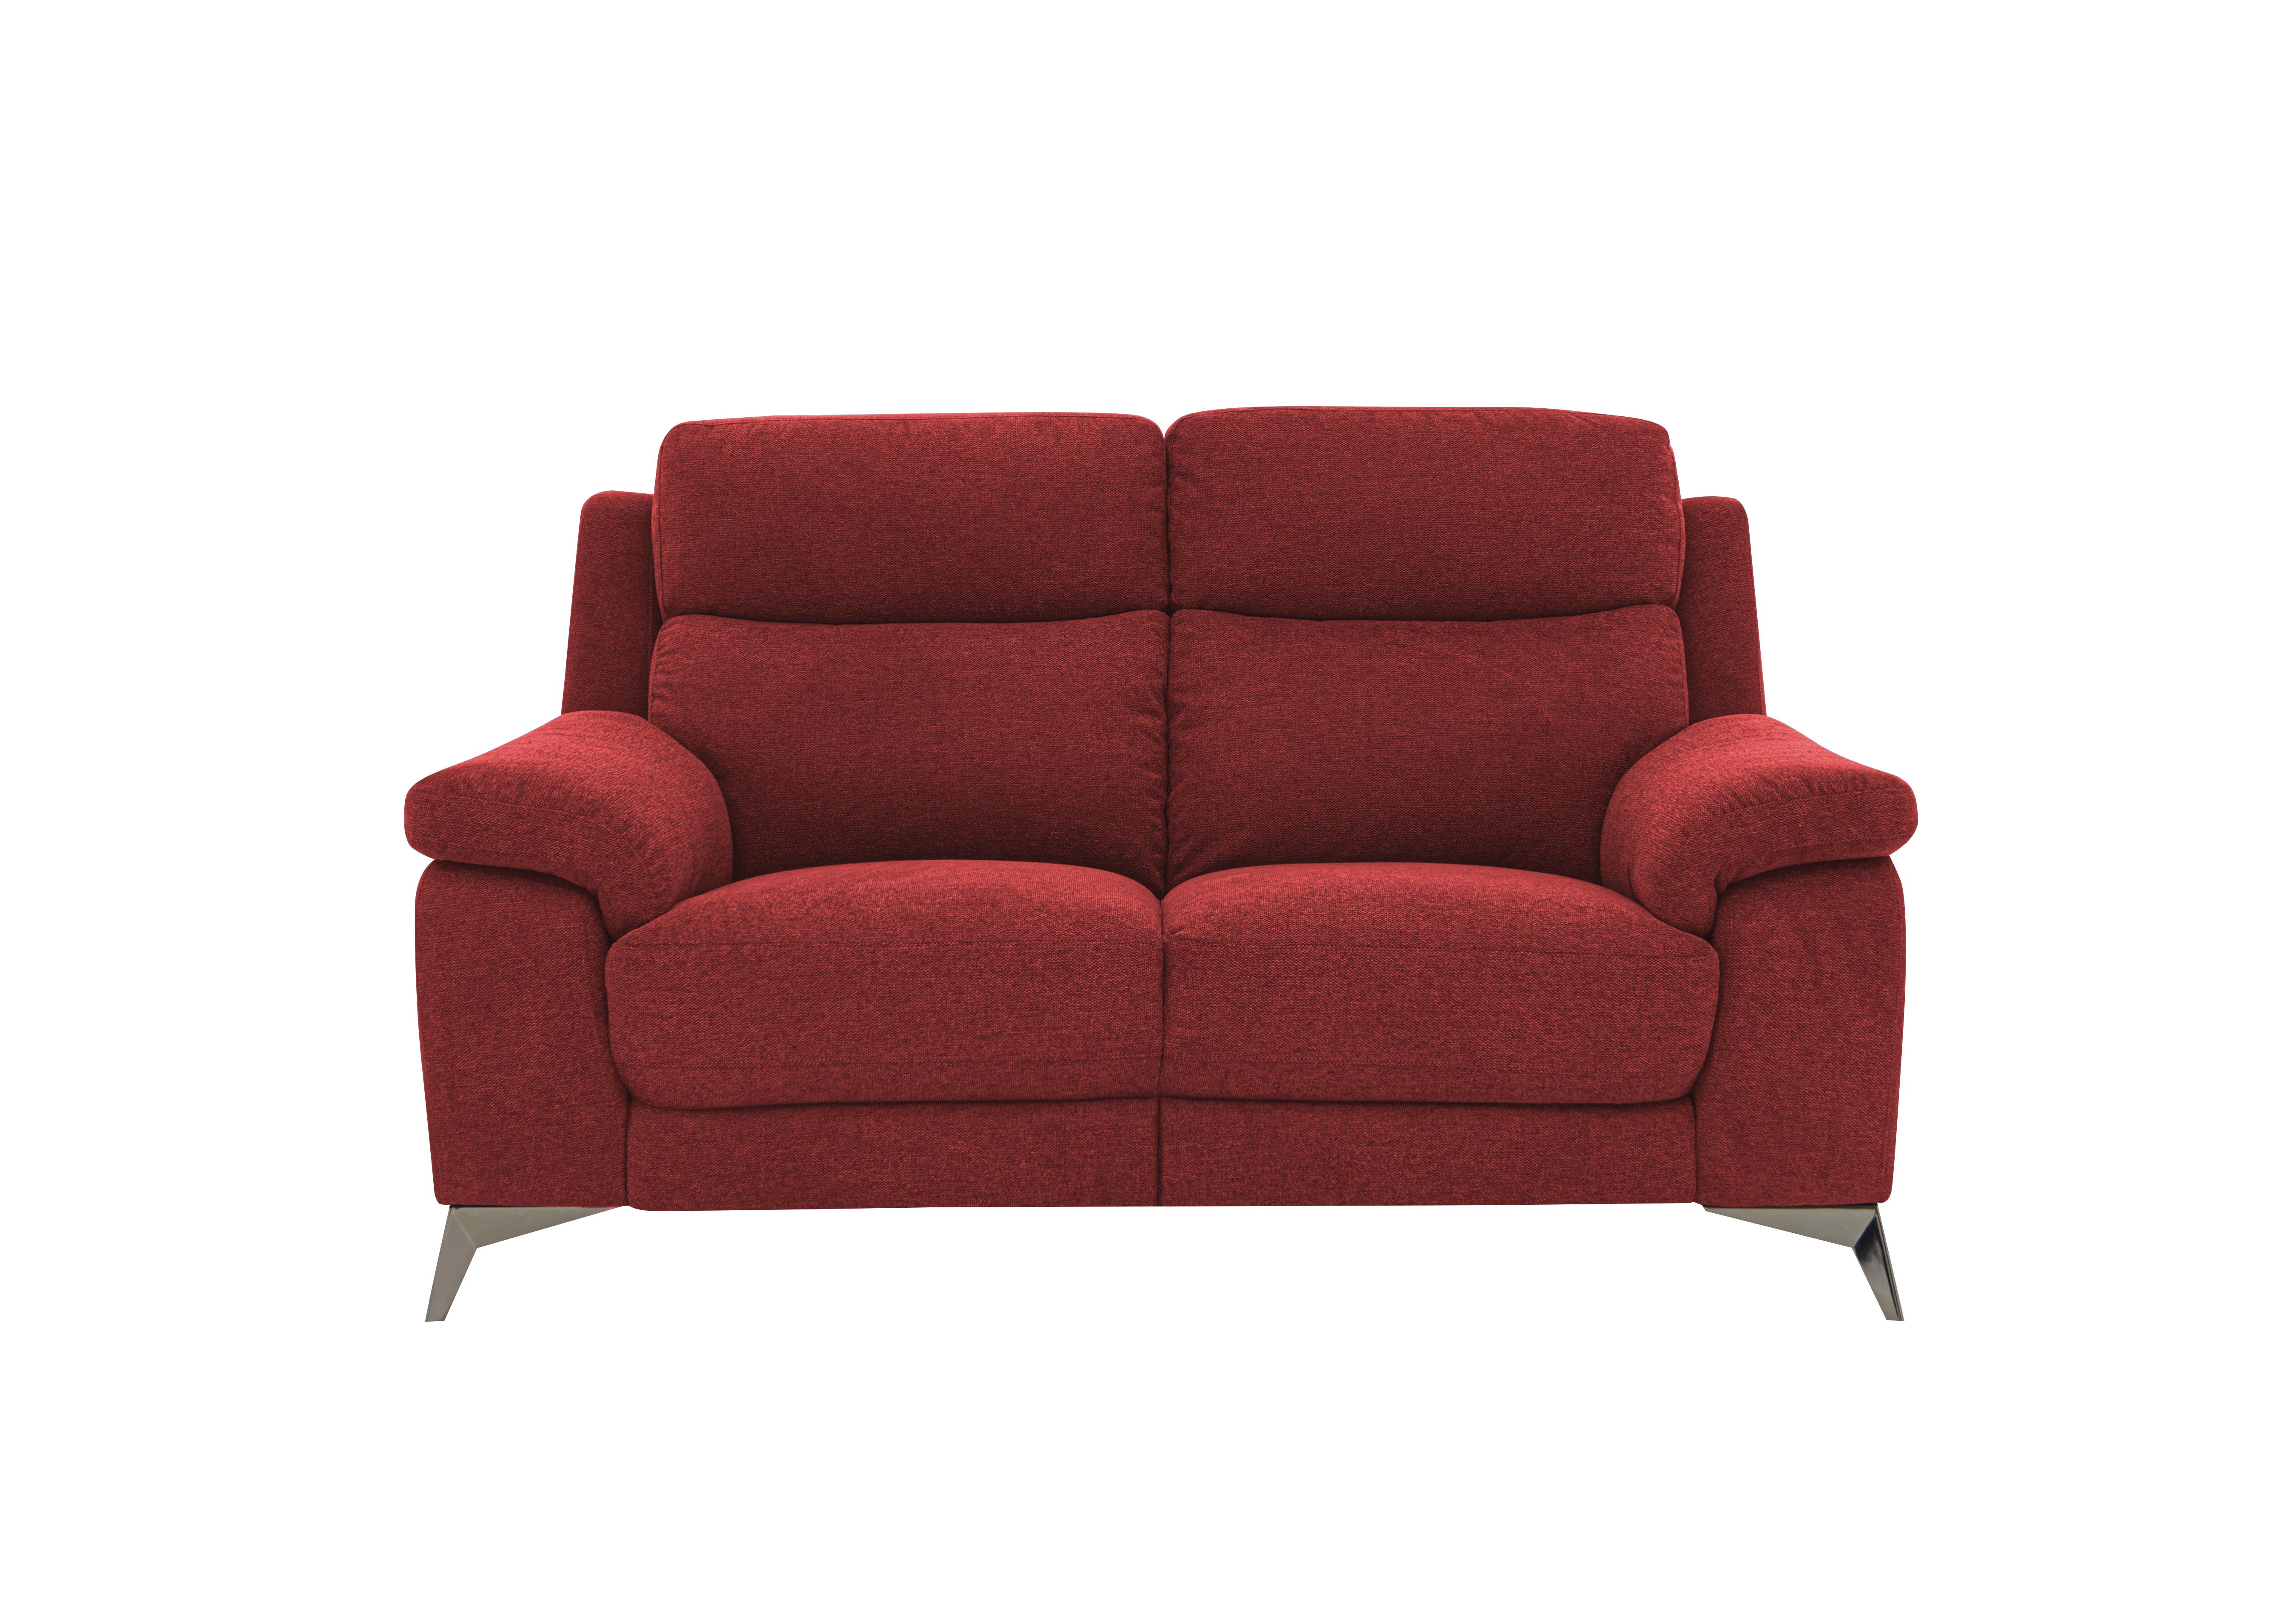 Missouri 2 Seater Fabric Sofa in Fab-Blt-R29 Red on Furniture Village